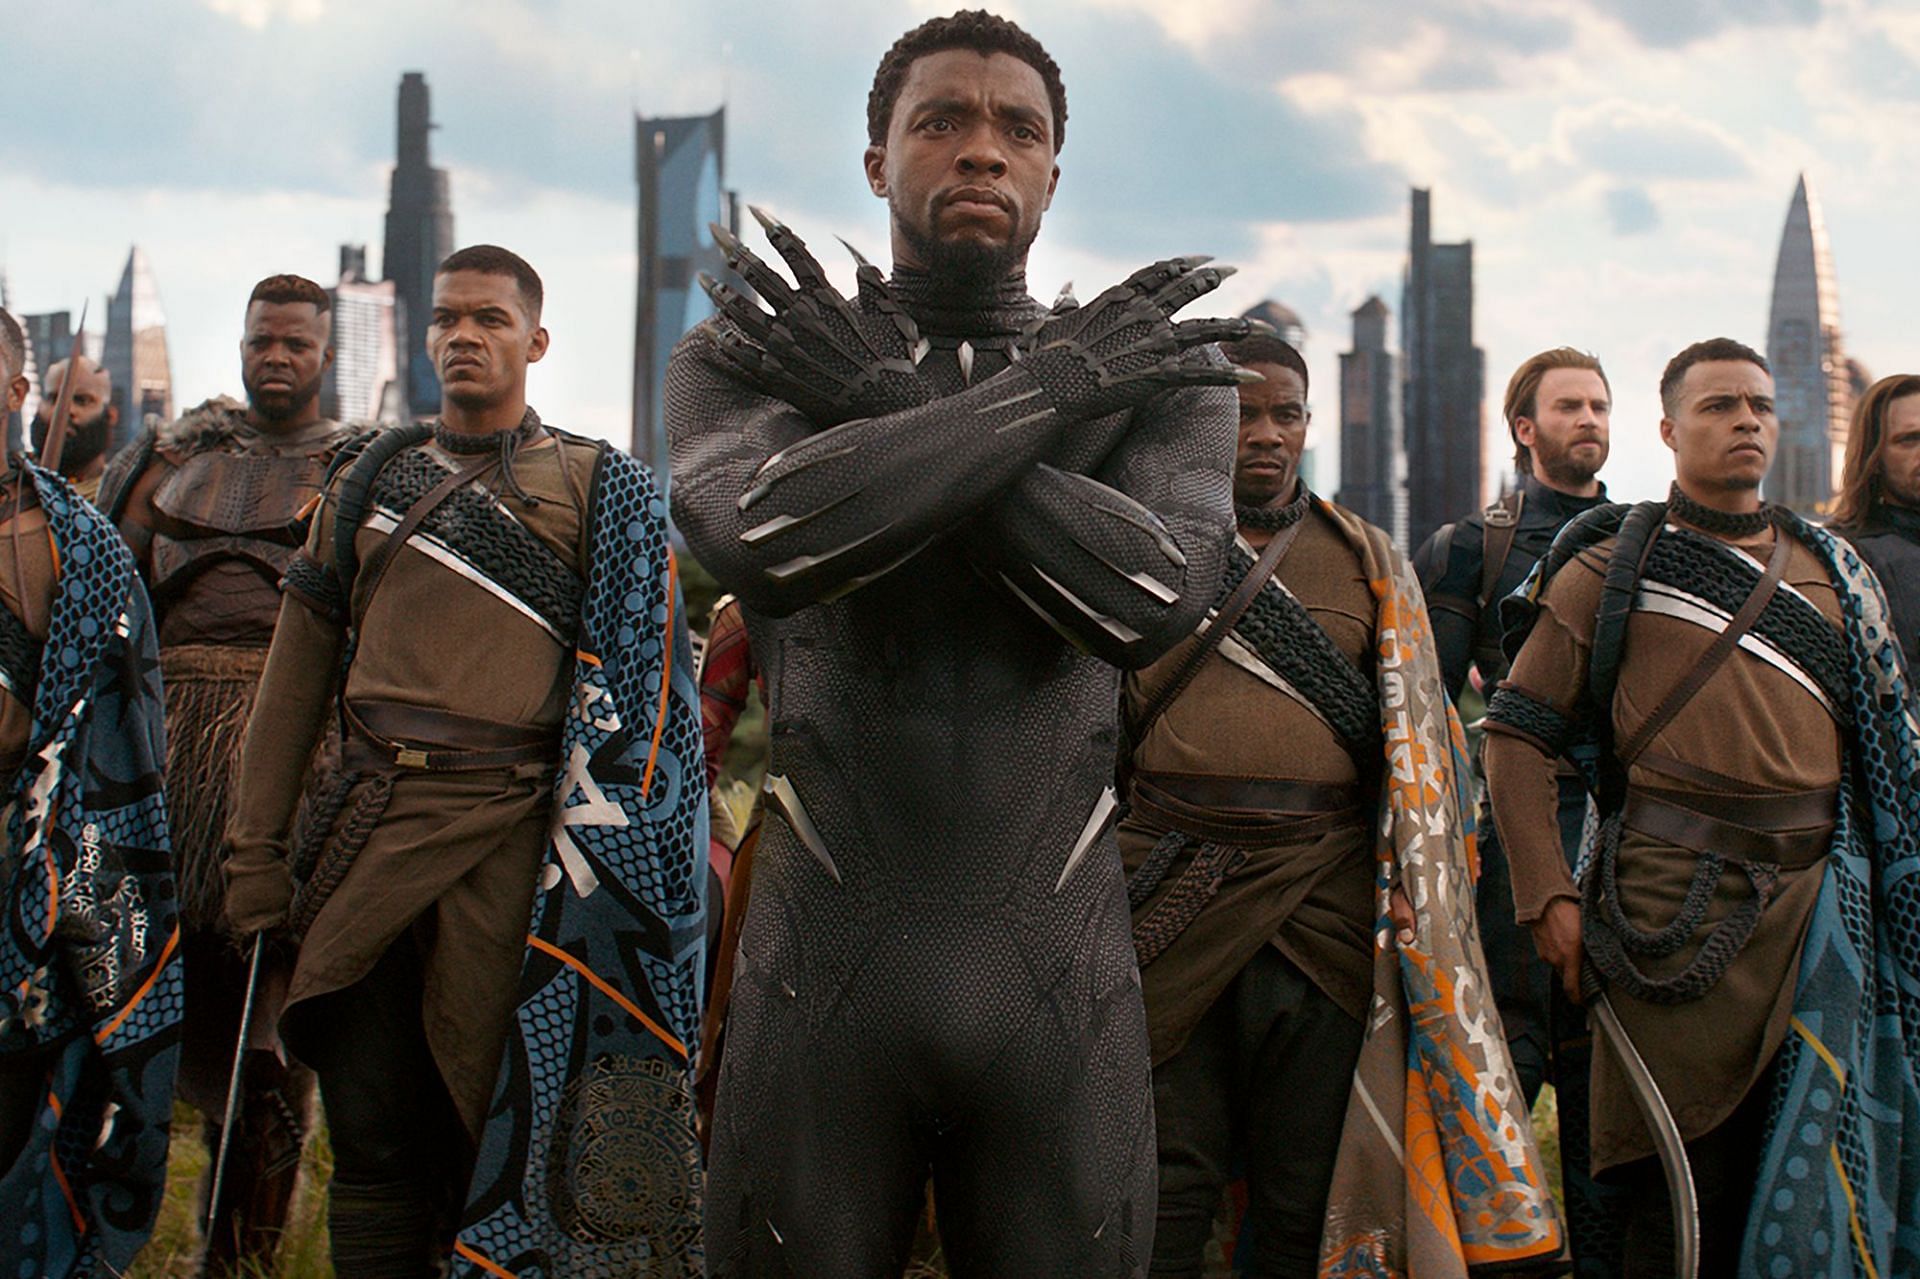 The Black Panther Franchise: Celebrating African &amp; African-American representation and culture (Image via Marvel Studios)